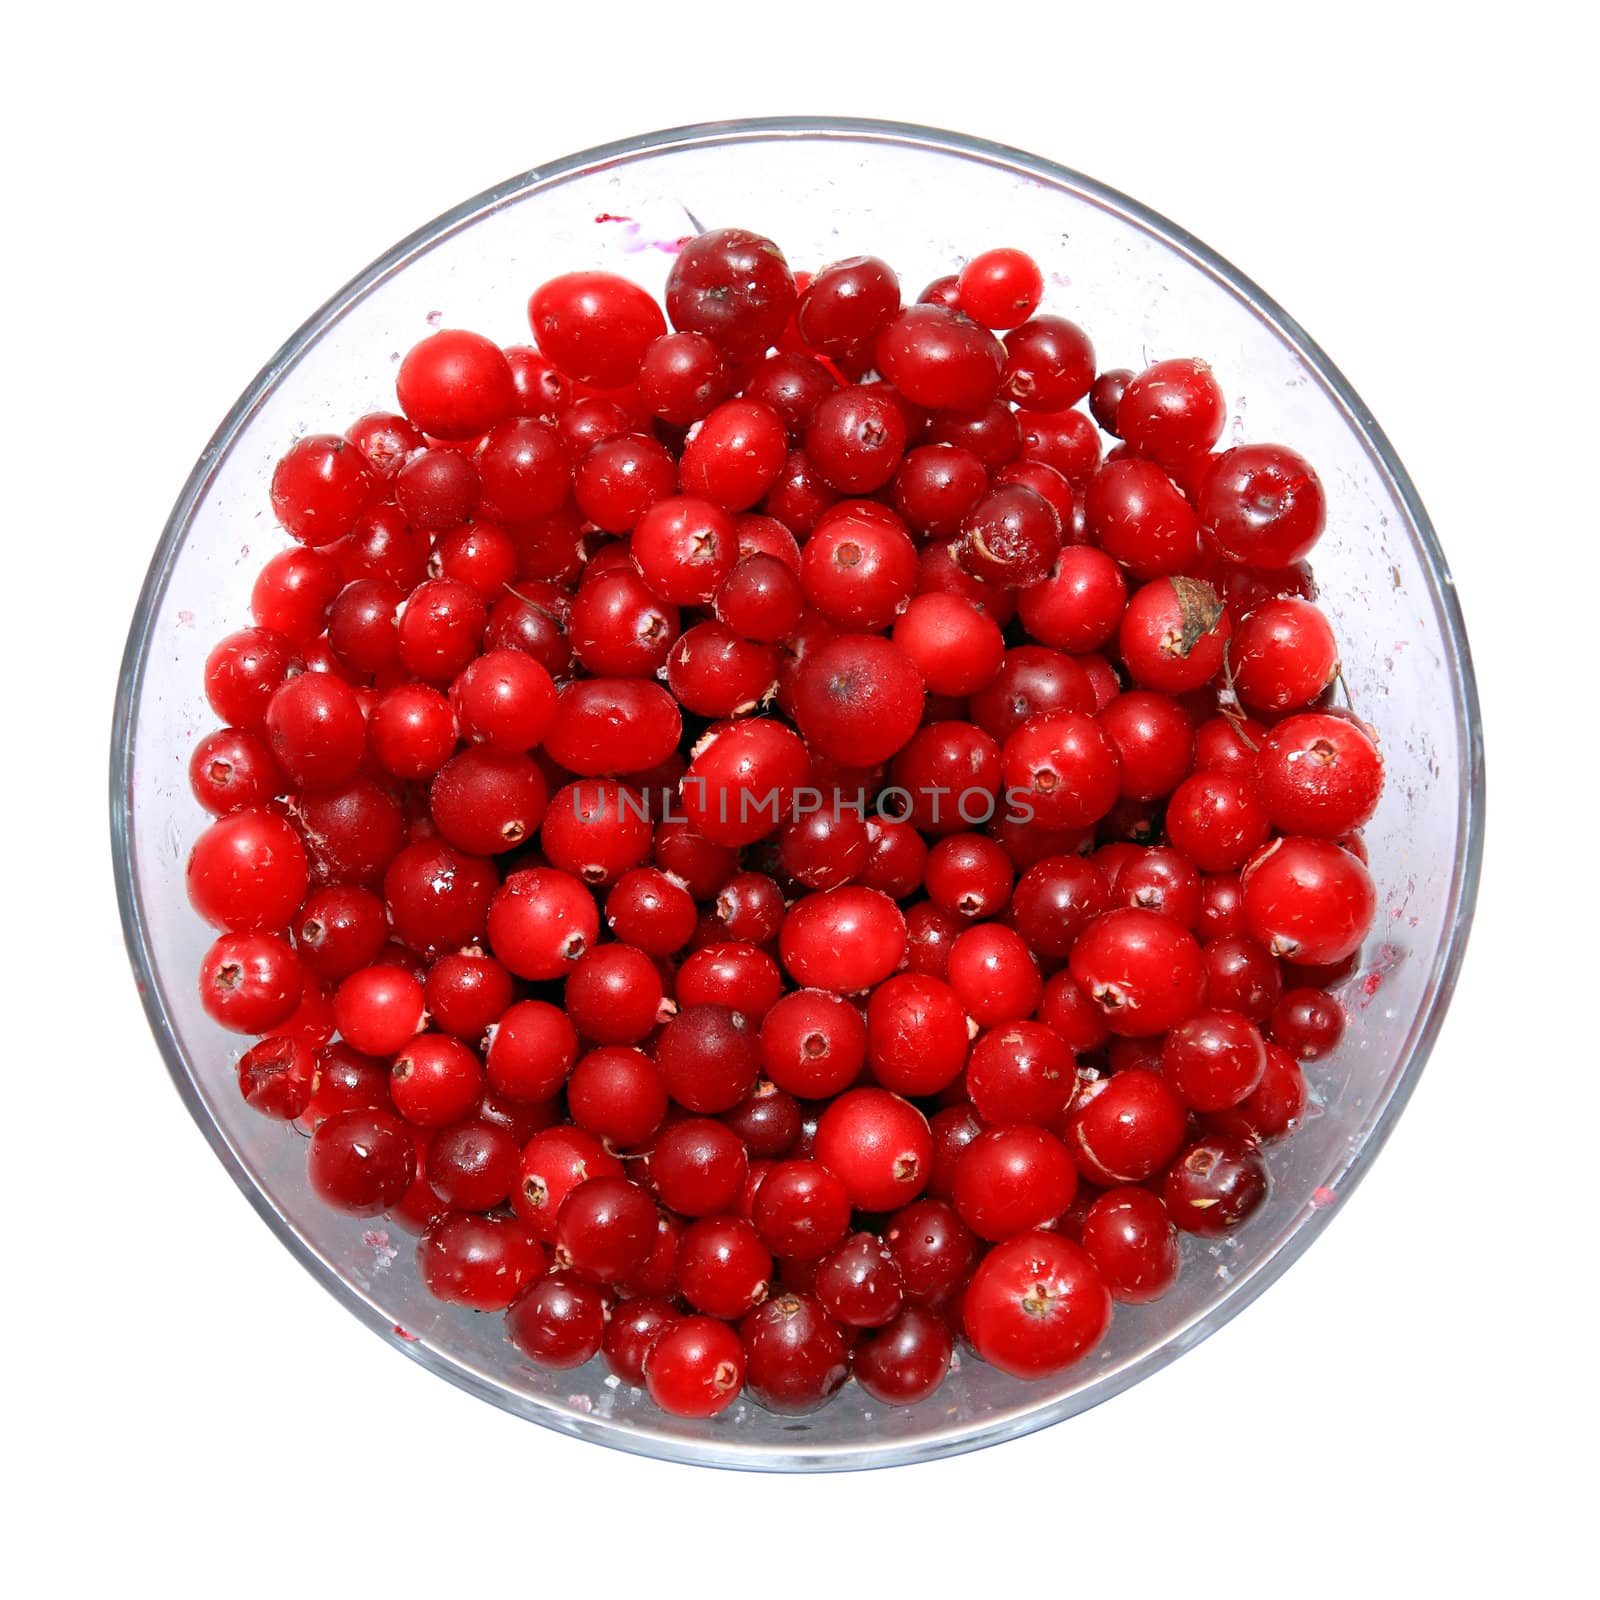 cranberry in plate on white background by basel101658